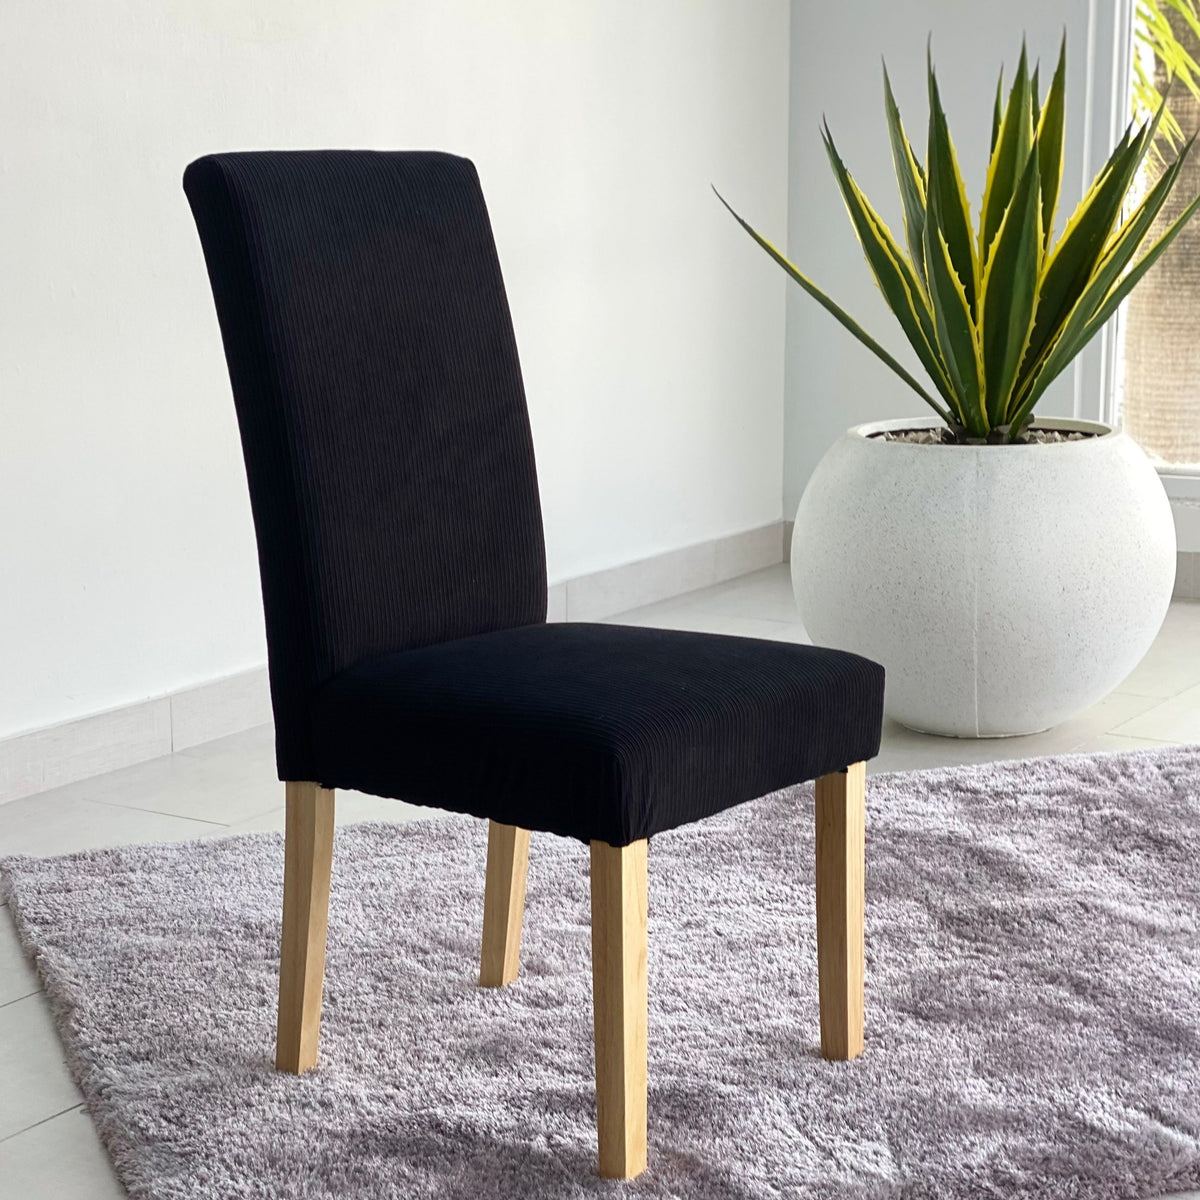 Upholstered Black Dining Chair